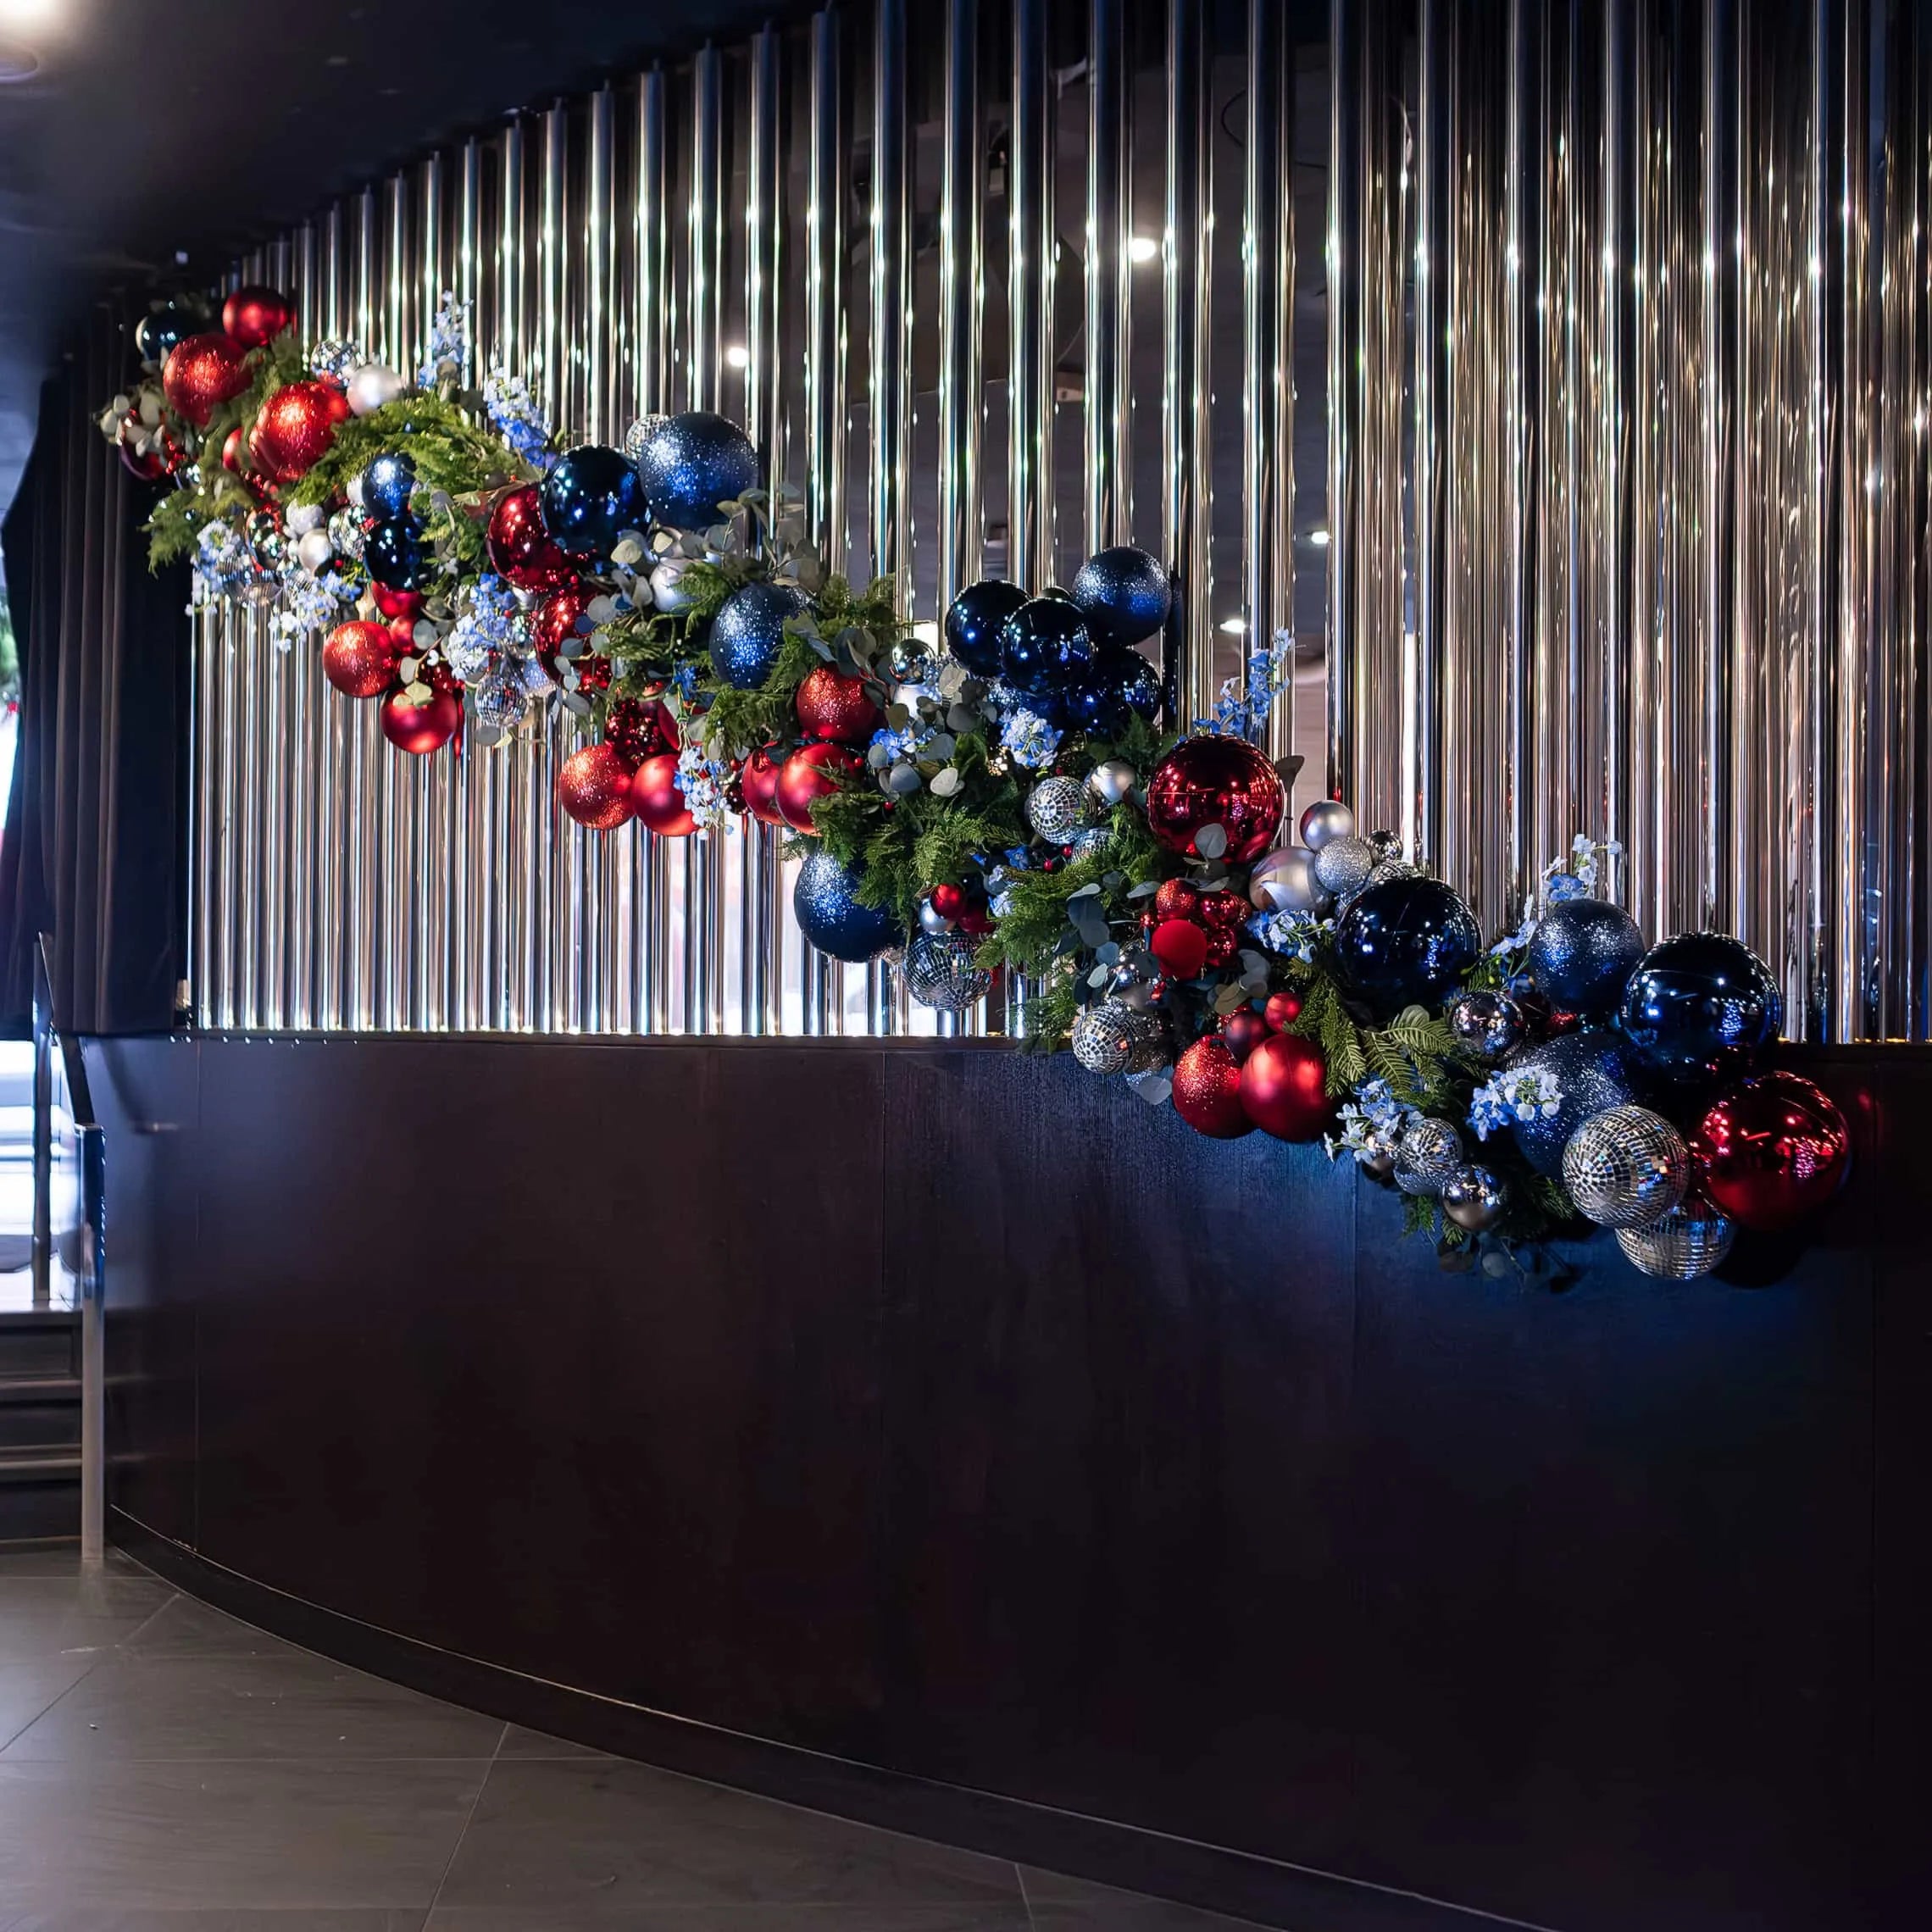 Festive Christmas garland elegantly draped over the reception desk at STK Steakhouse, with lush greenery against a modern backdrop of vertical metallic stripes, red and blue baubles, and silver decorations.